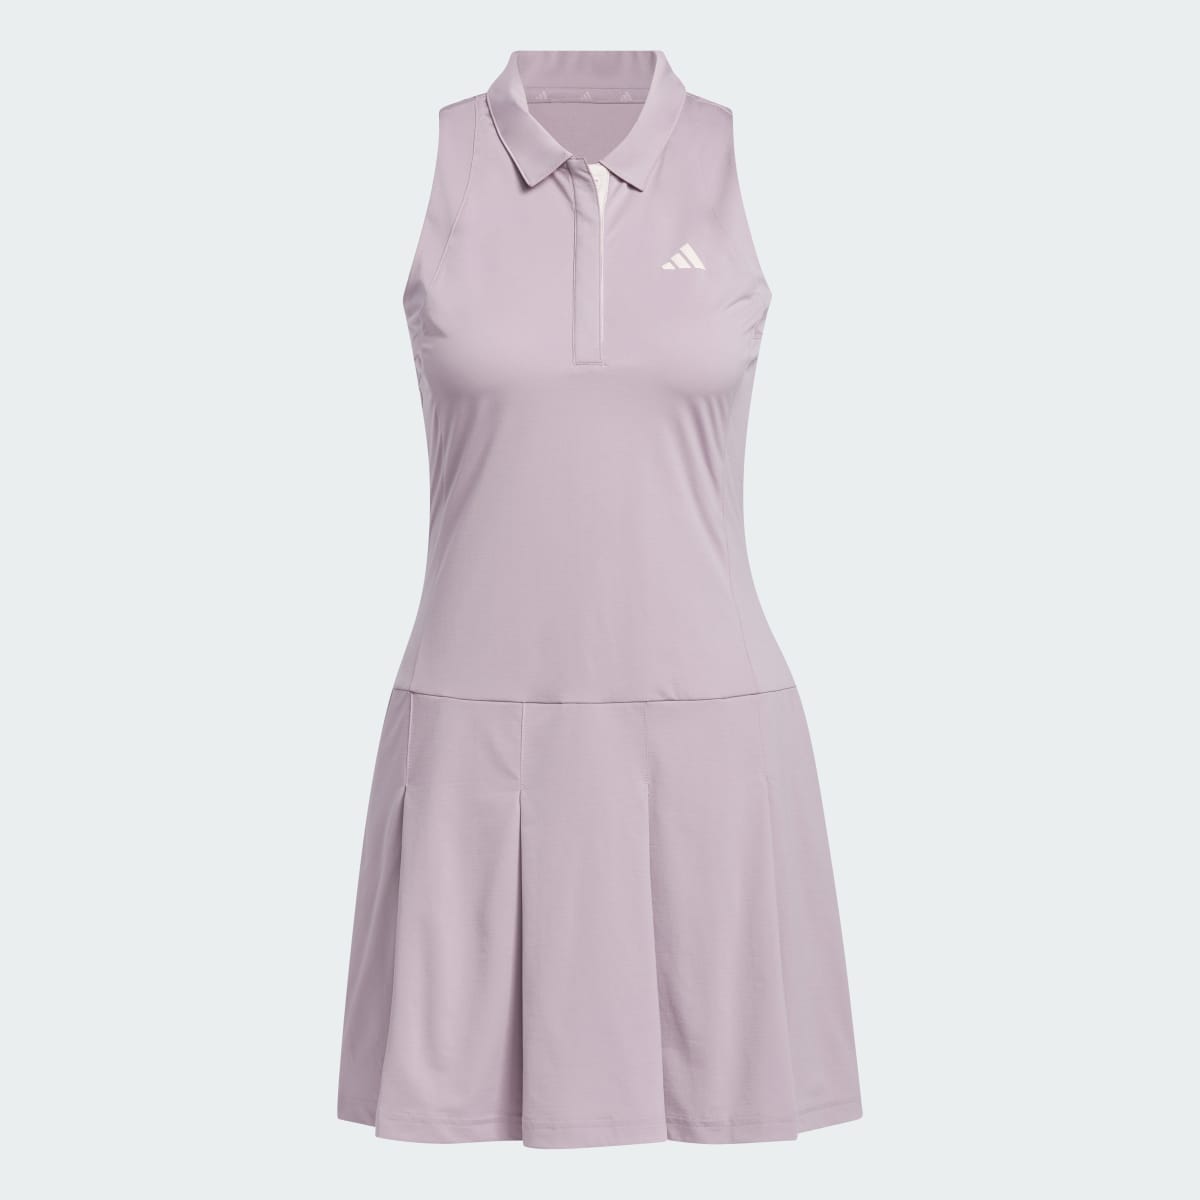 Adidas Women's Ultimate365 Tour Pleated Dress. 6